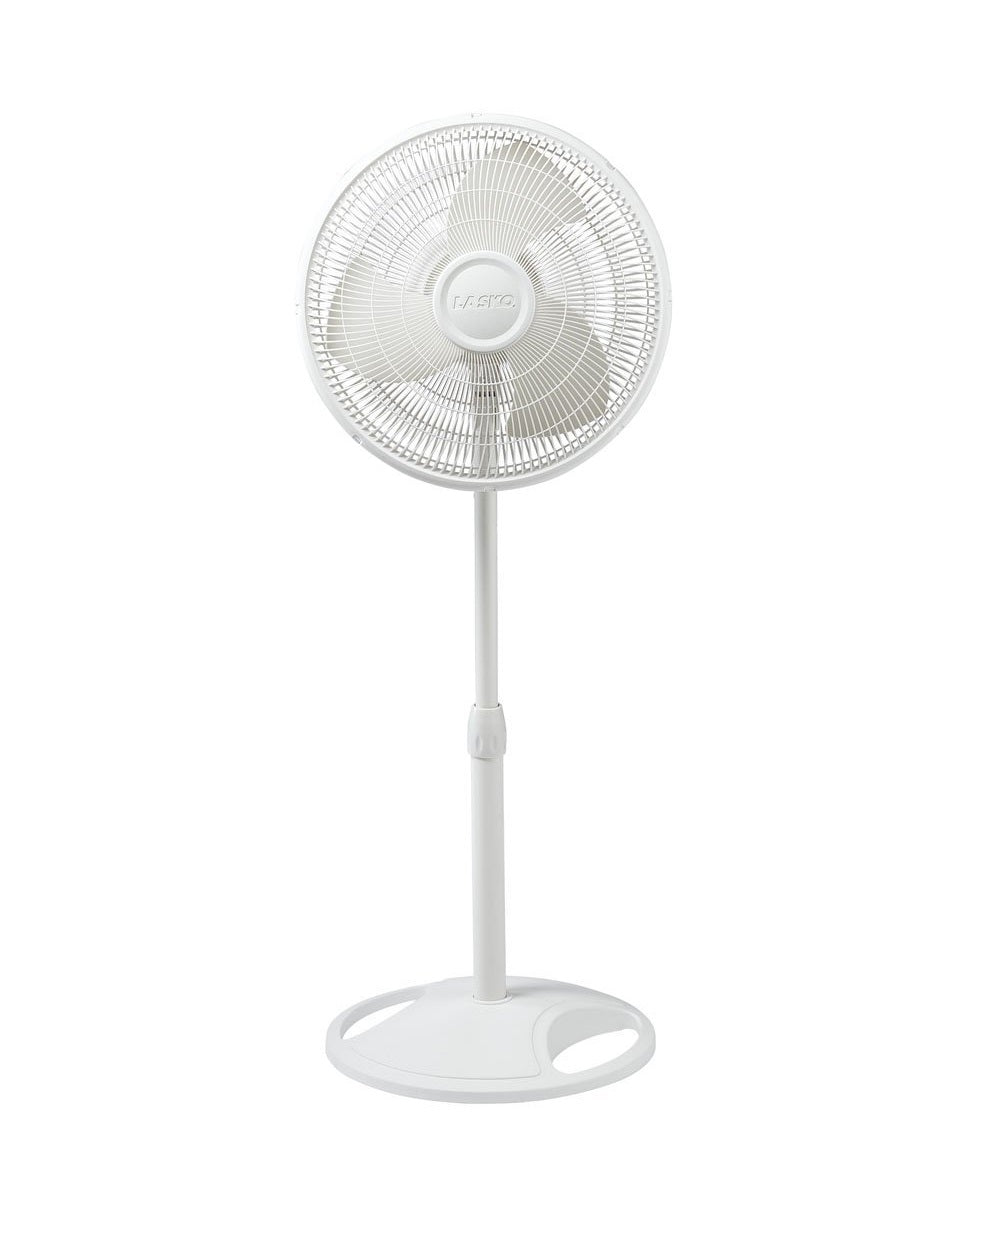 buy oscillating fans at cheap rate in bulk. wholesale & retail venting & fan accessories store.